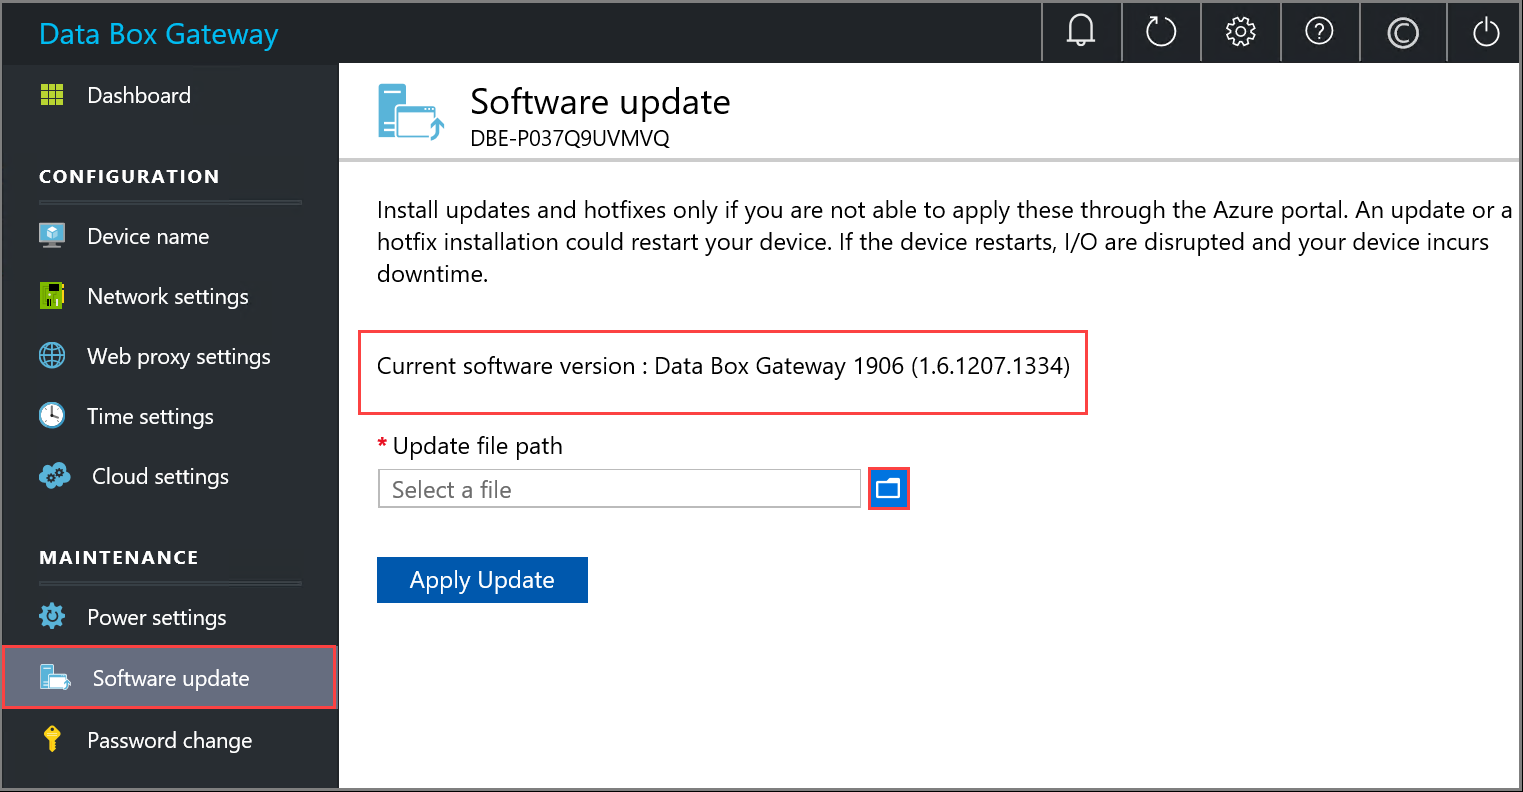 Screenshot of the Data Box Gateway local web U I with the Software update option and the Current software version message called out.